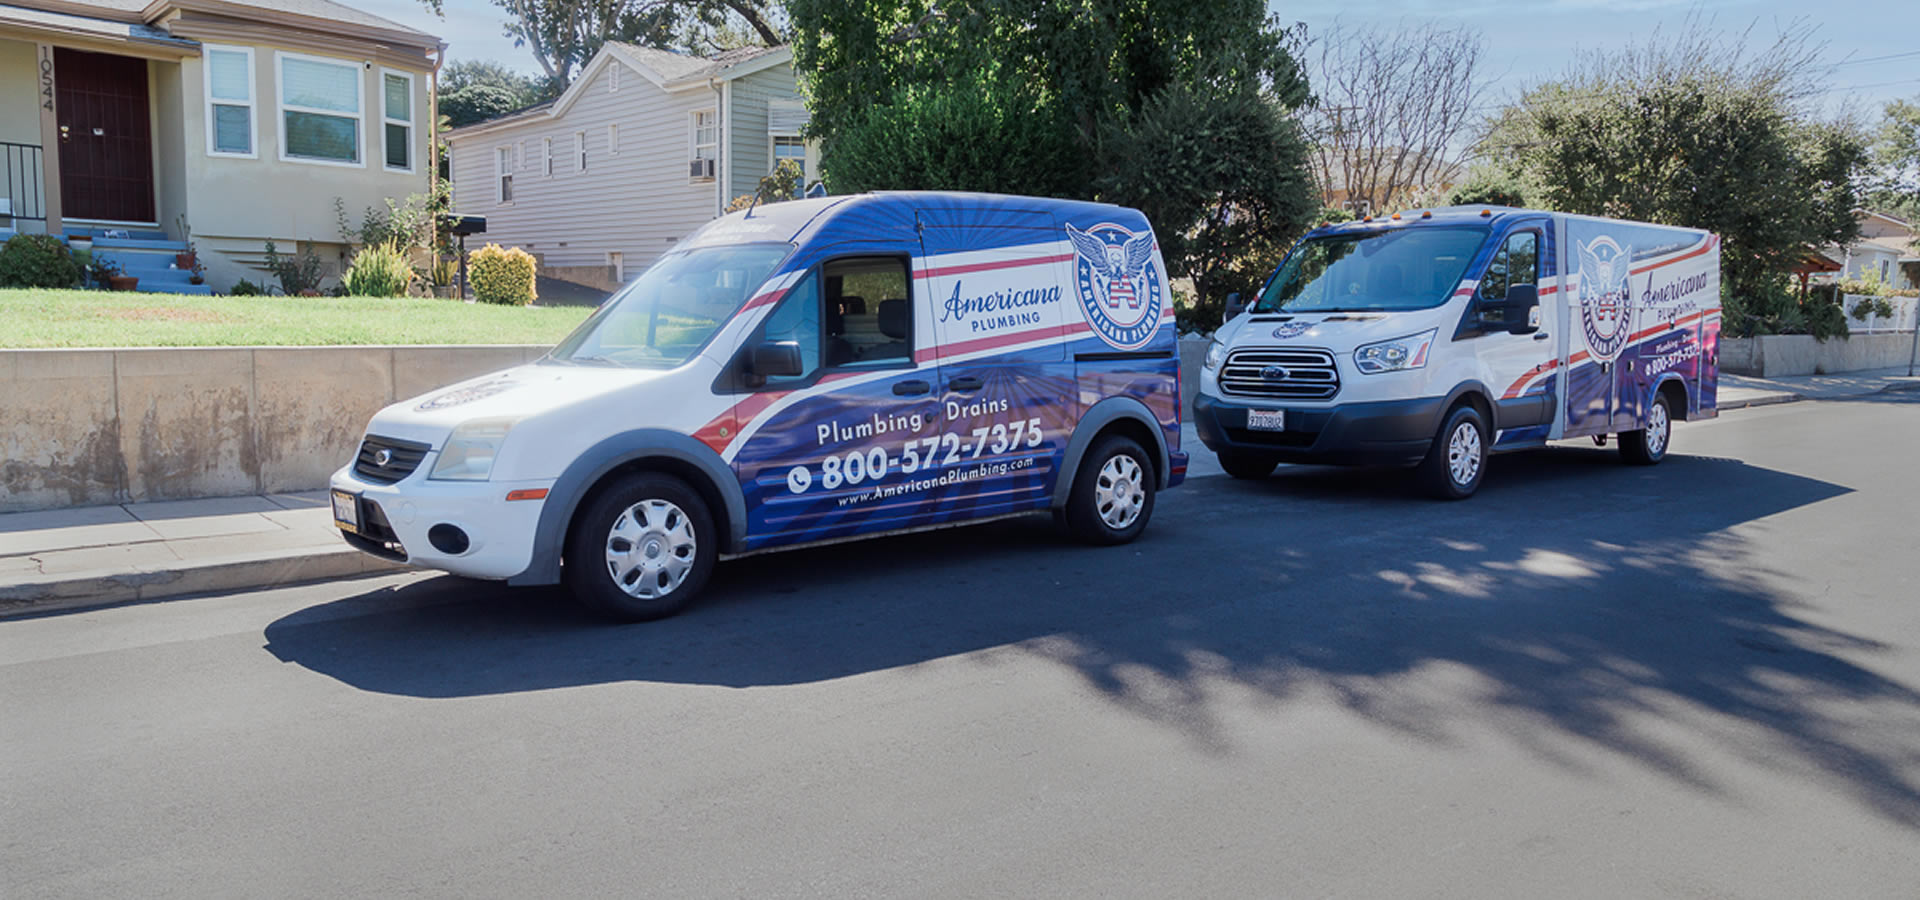 Drain Cleaning in Sunland, CA